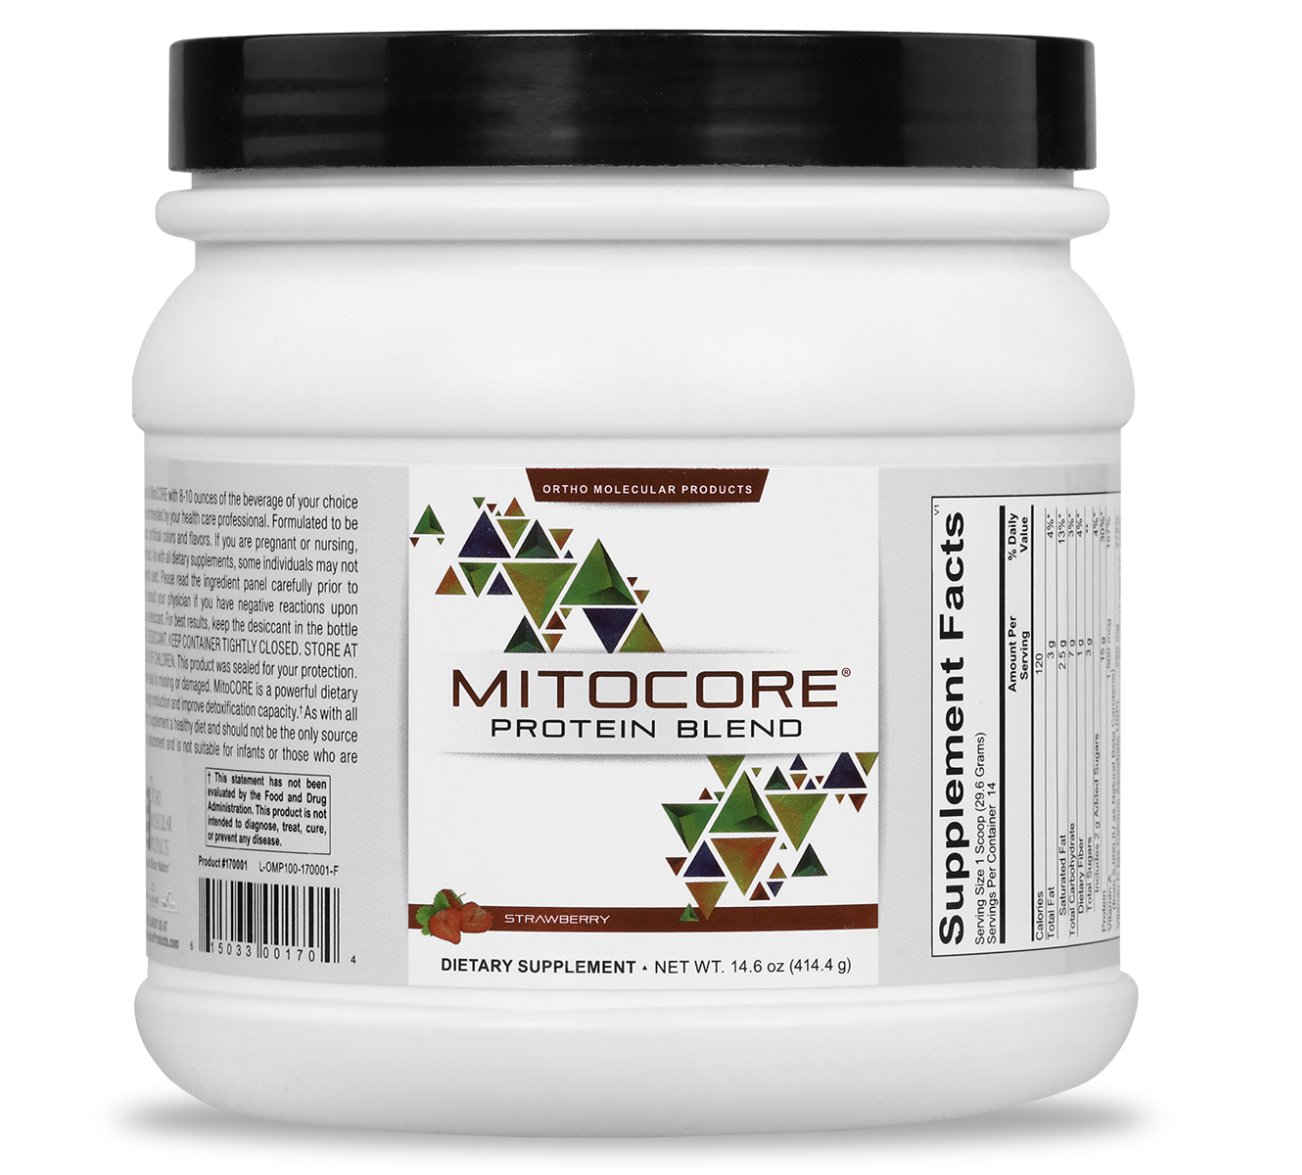 OM MitoCORE Protein Blend